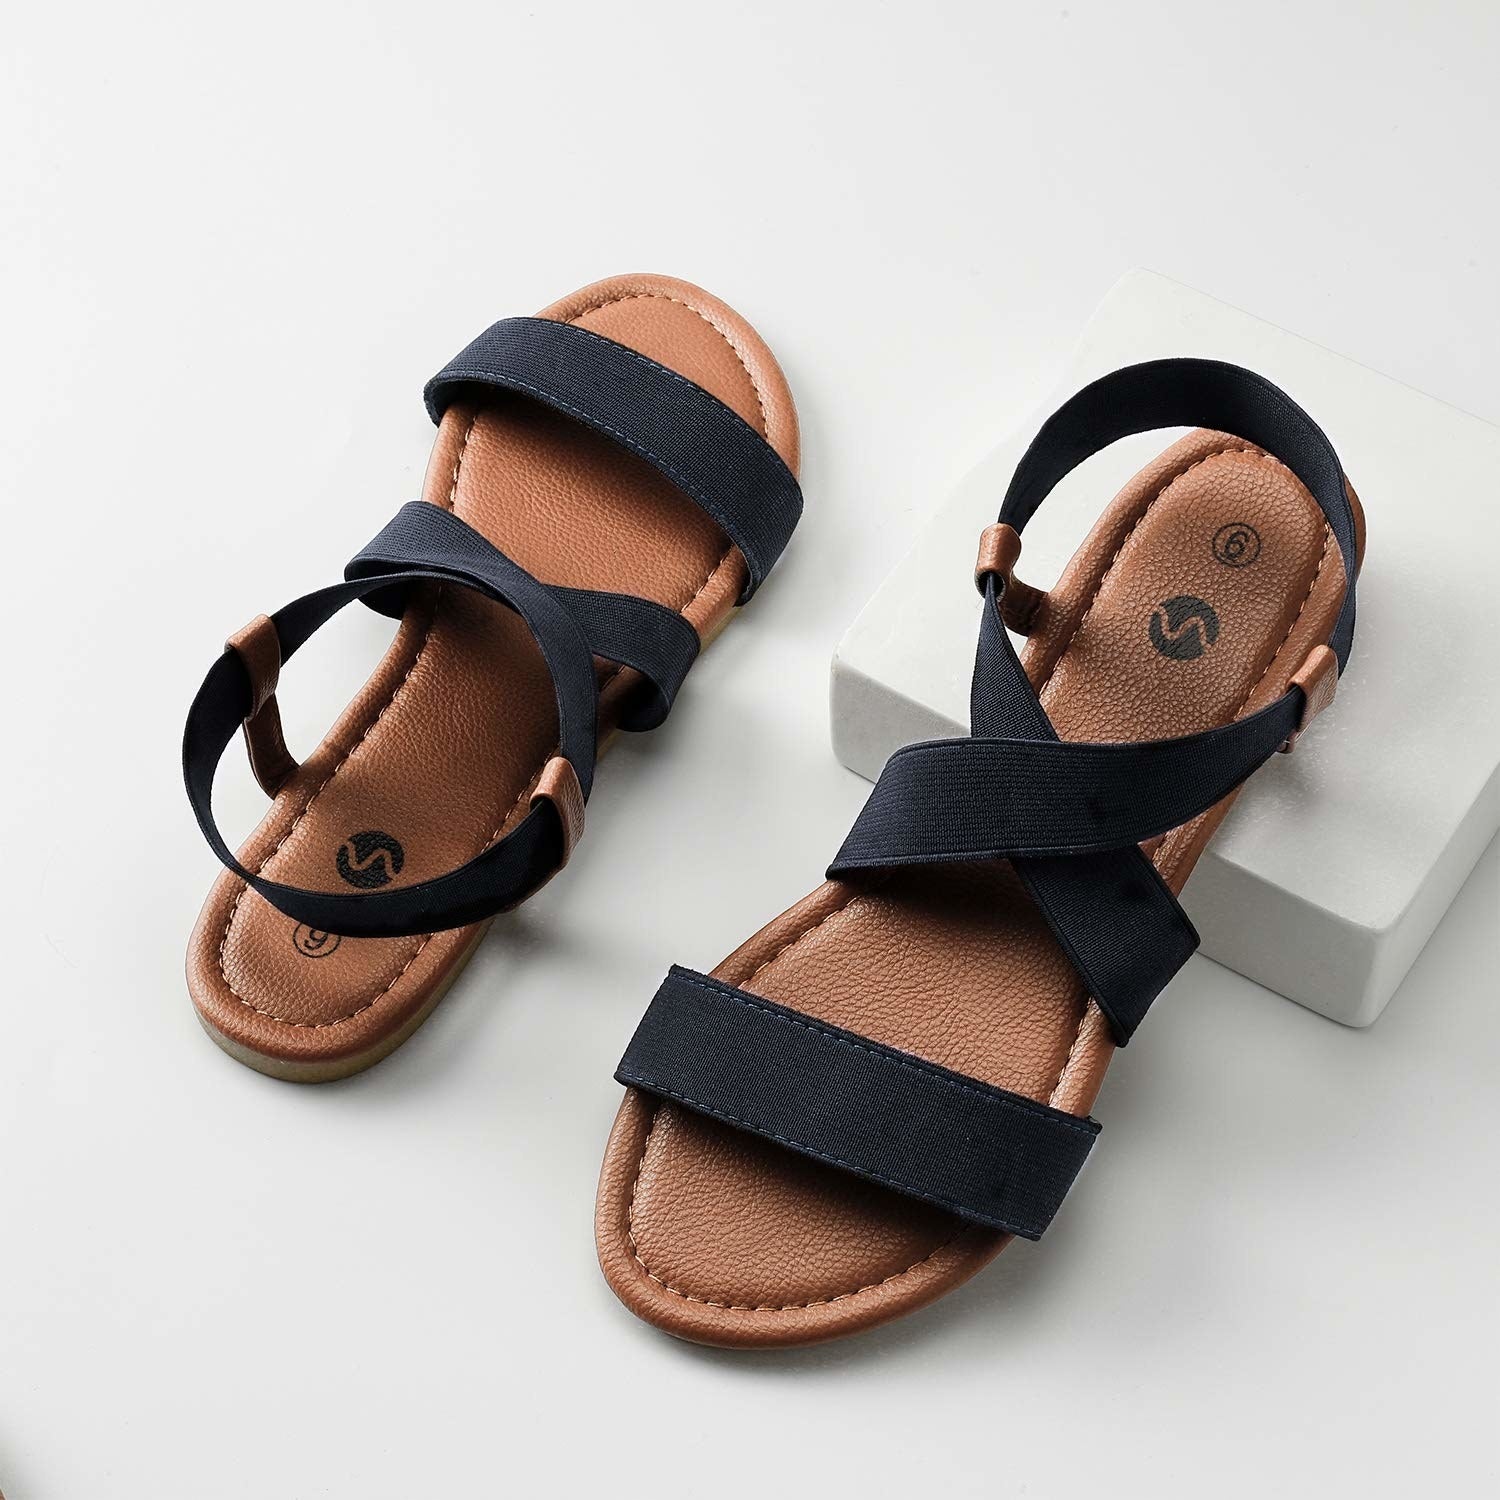 The Rekayla Elastic Sandals Are Just $22 at